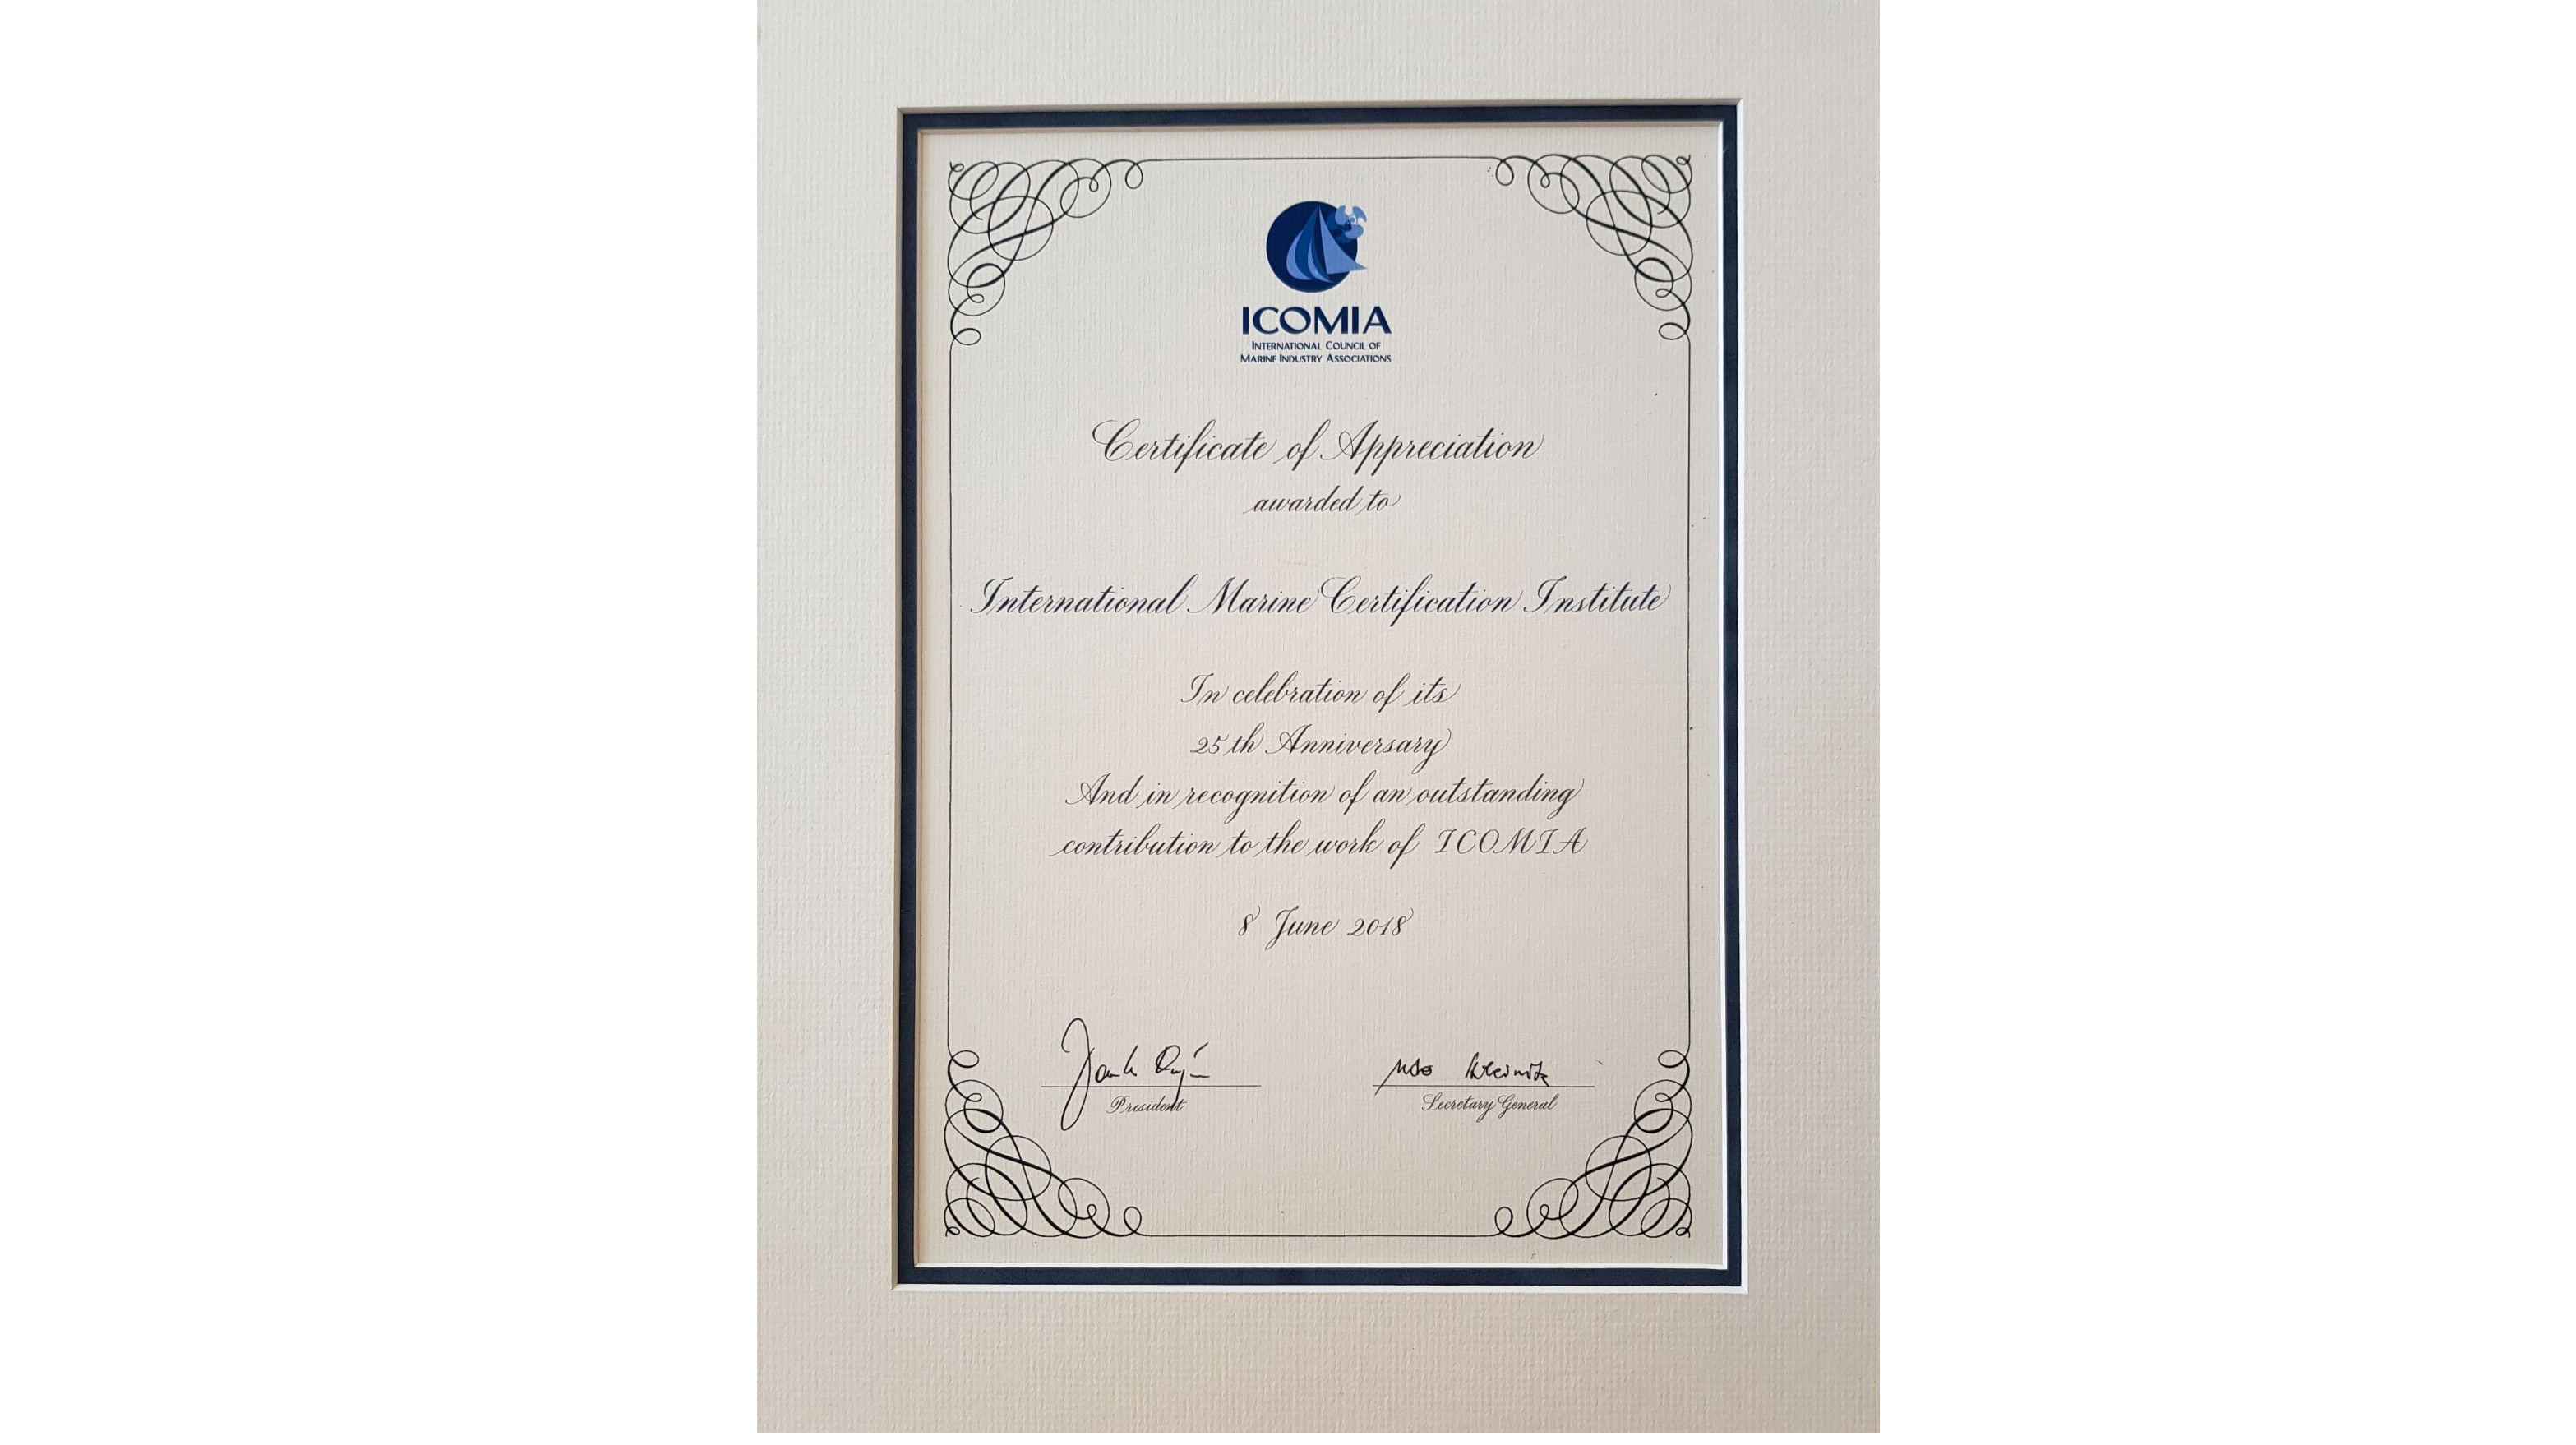 ICOMIA honours IMCI for “outstanding contributions”